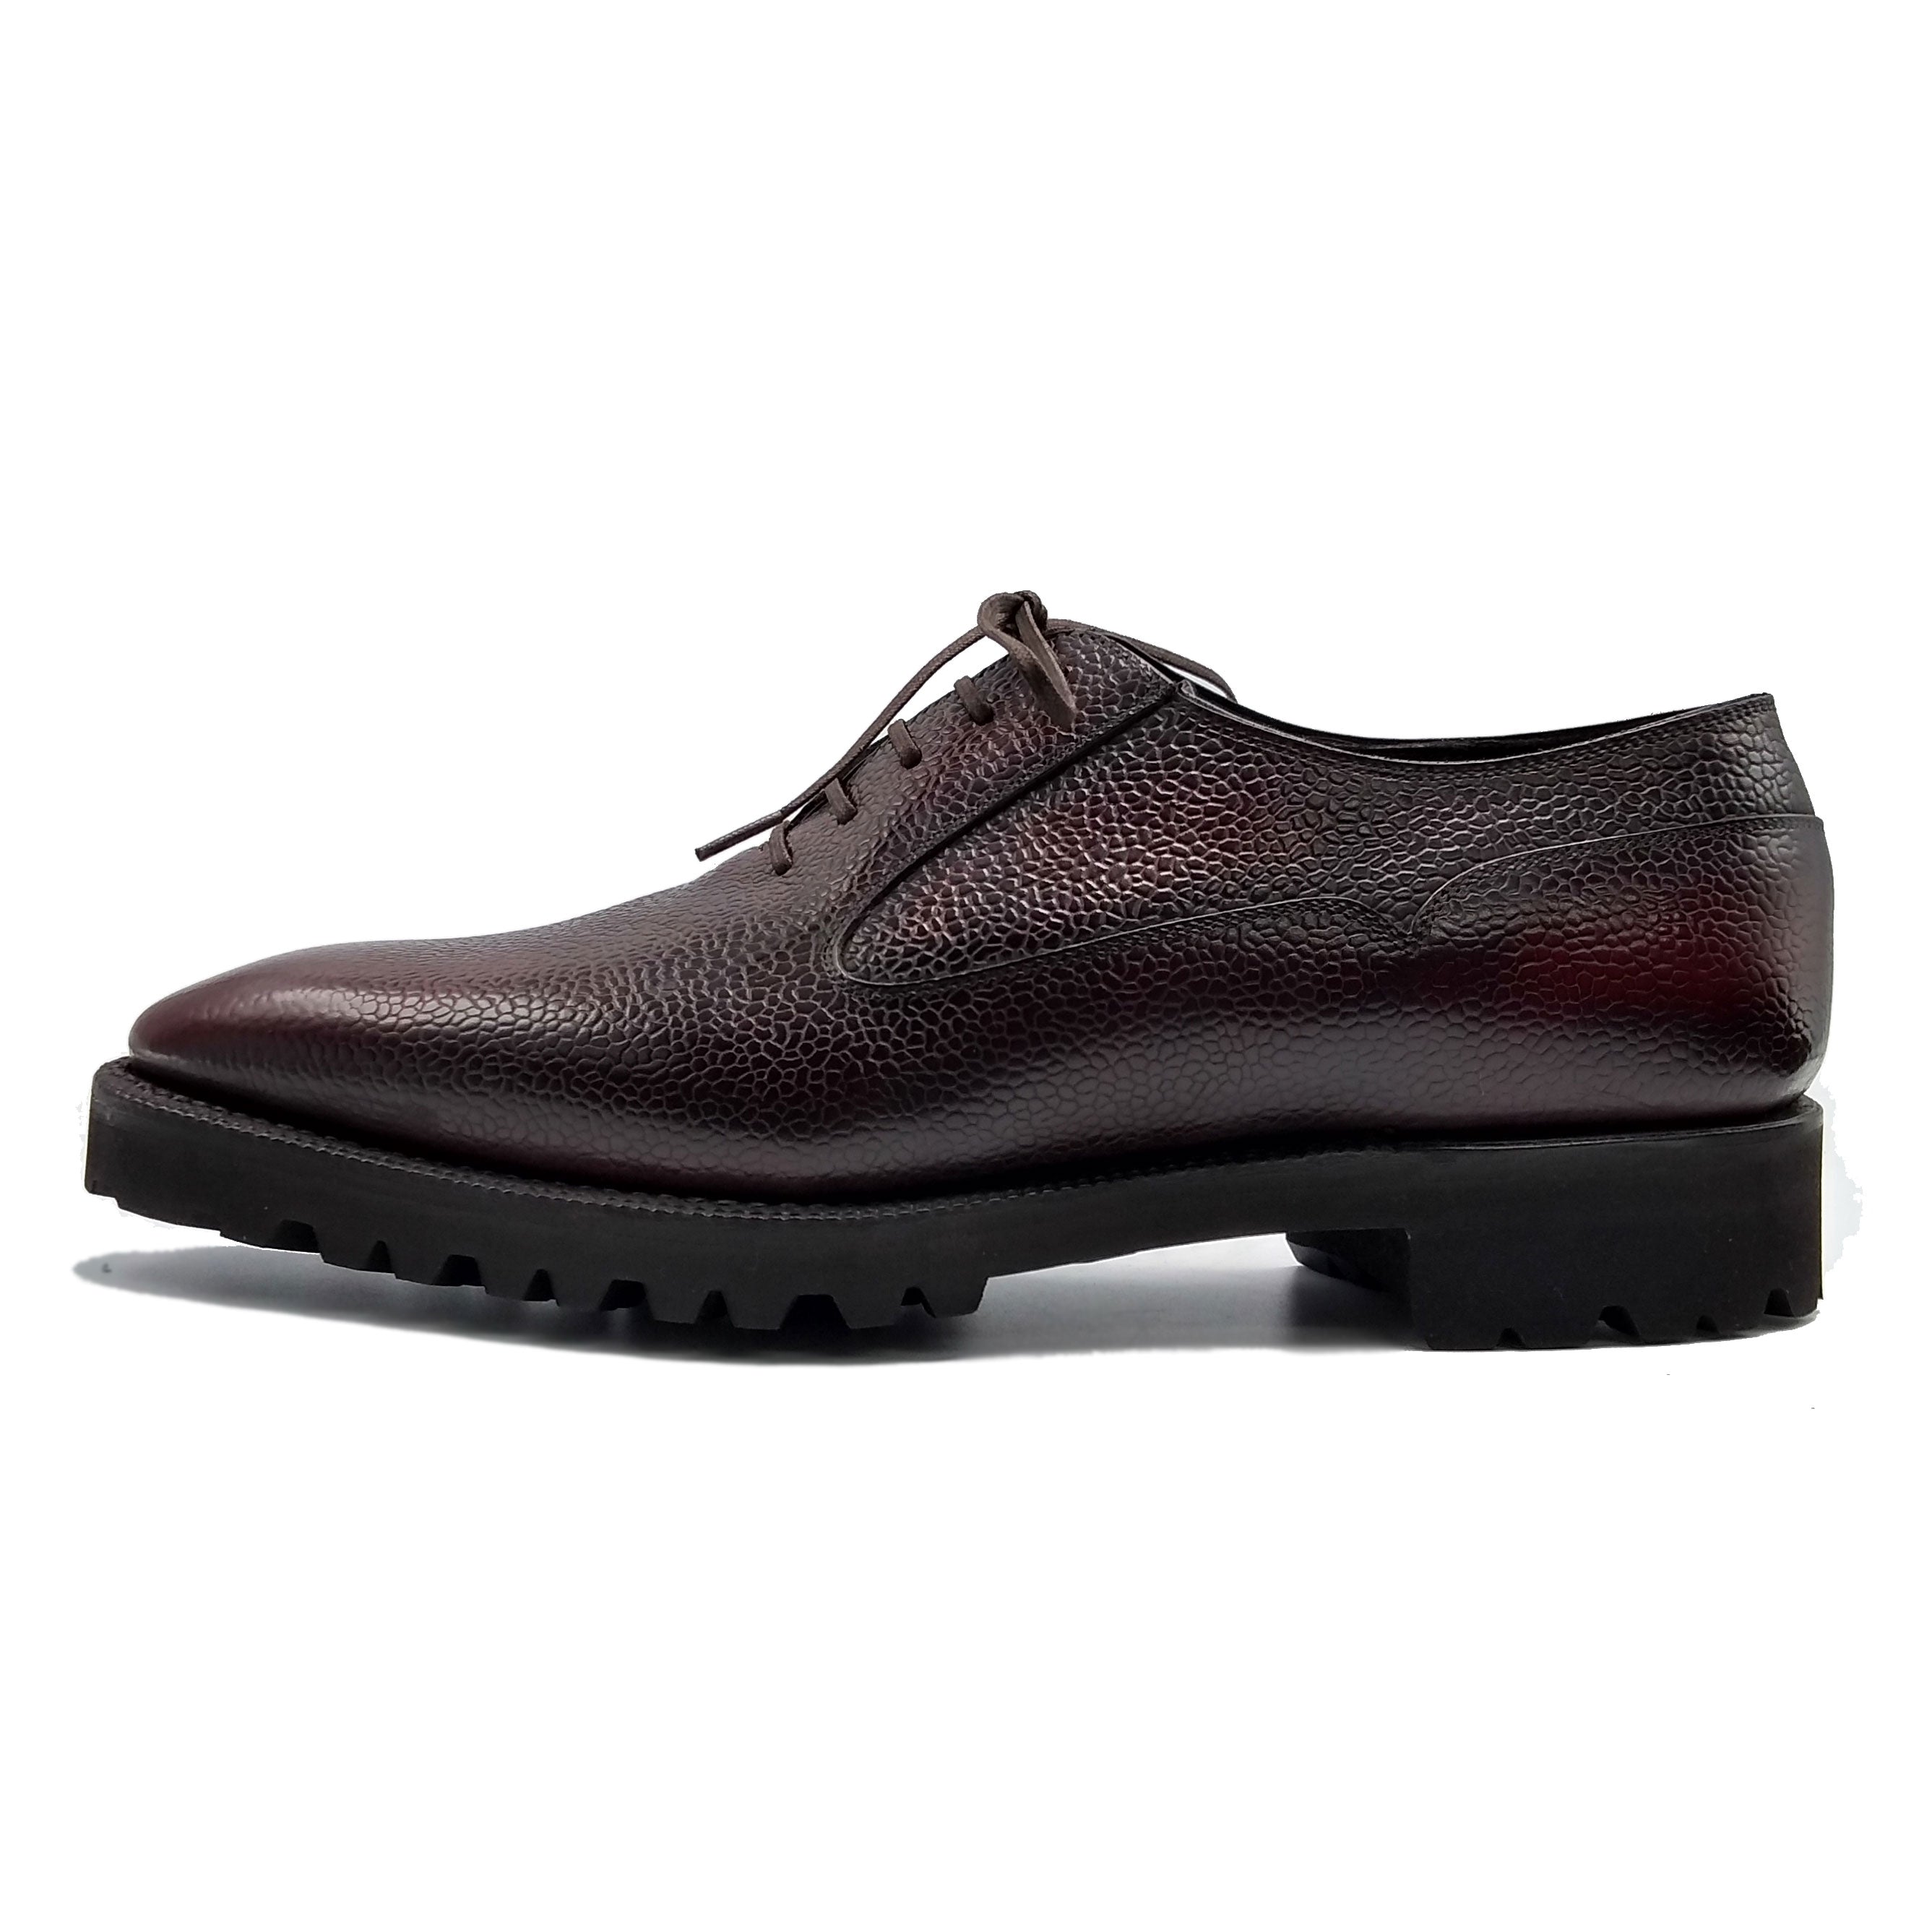 Mens leather balmoral oxford shoes made in Spain